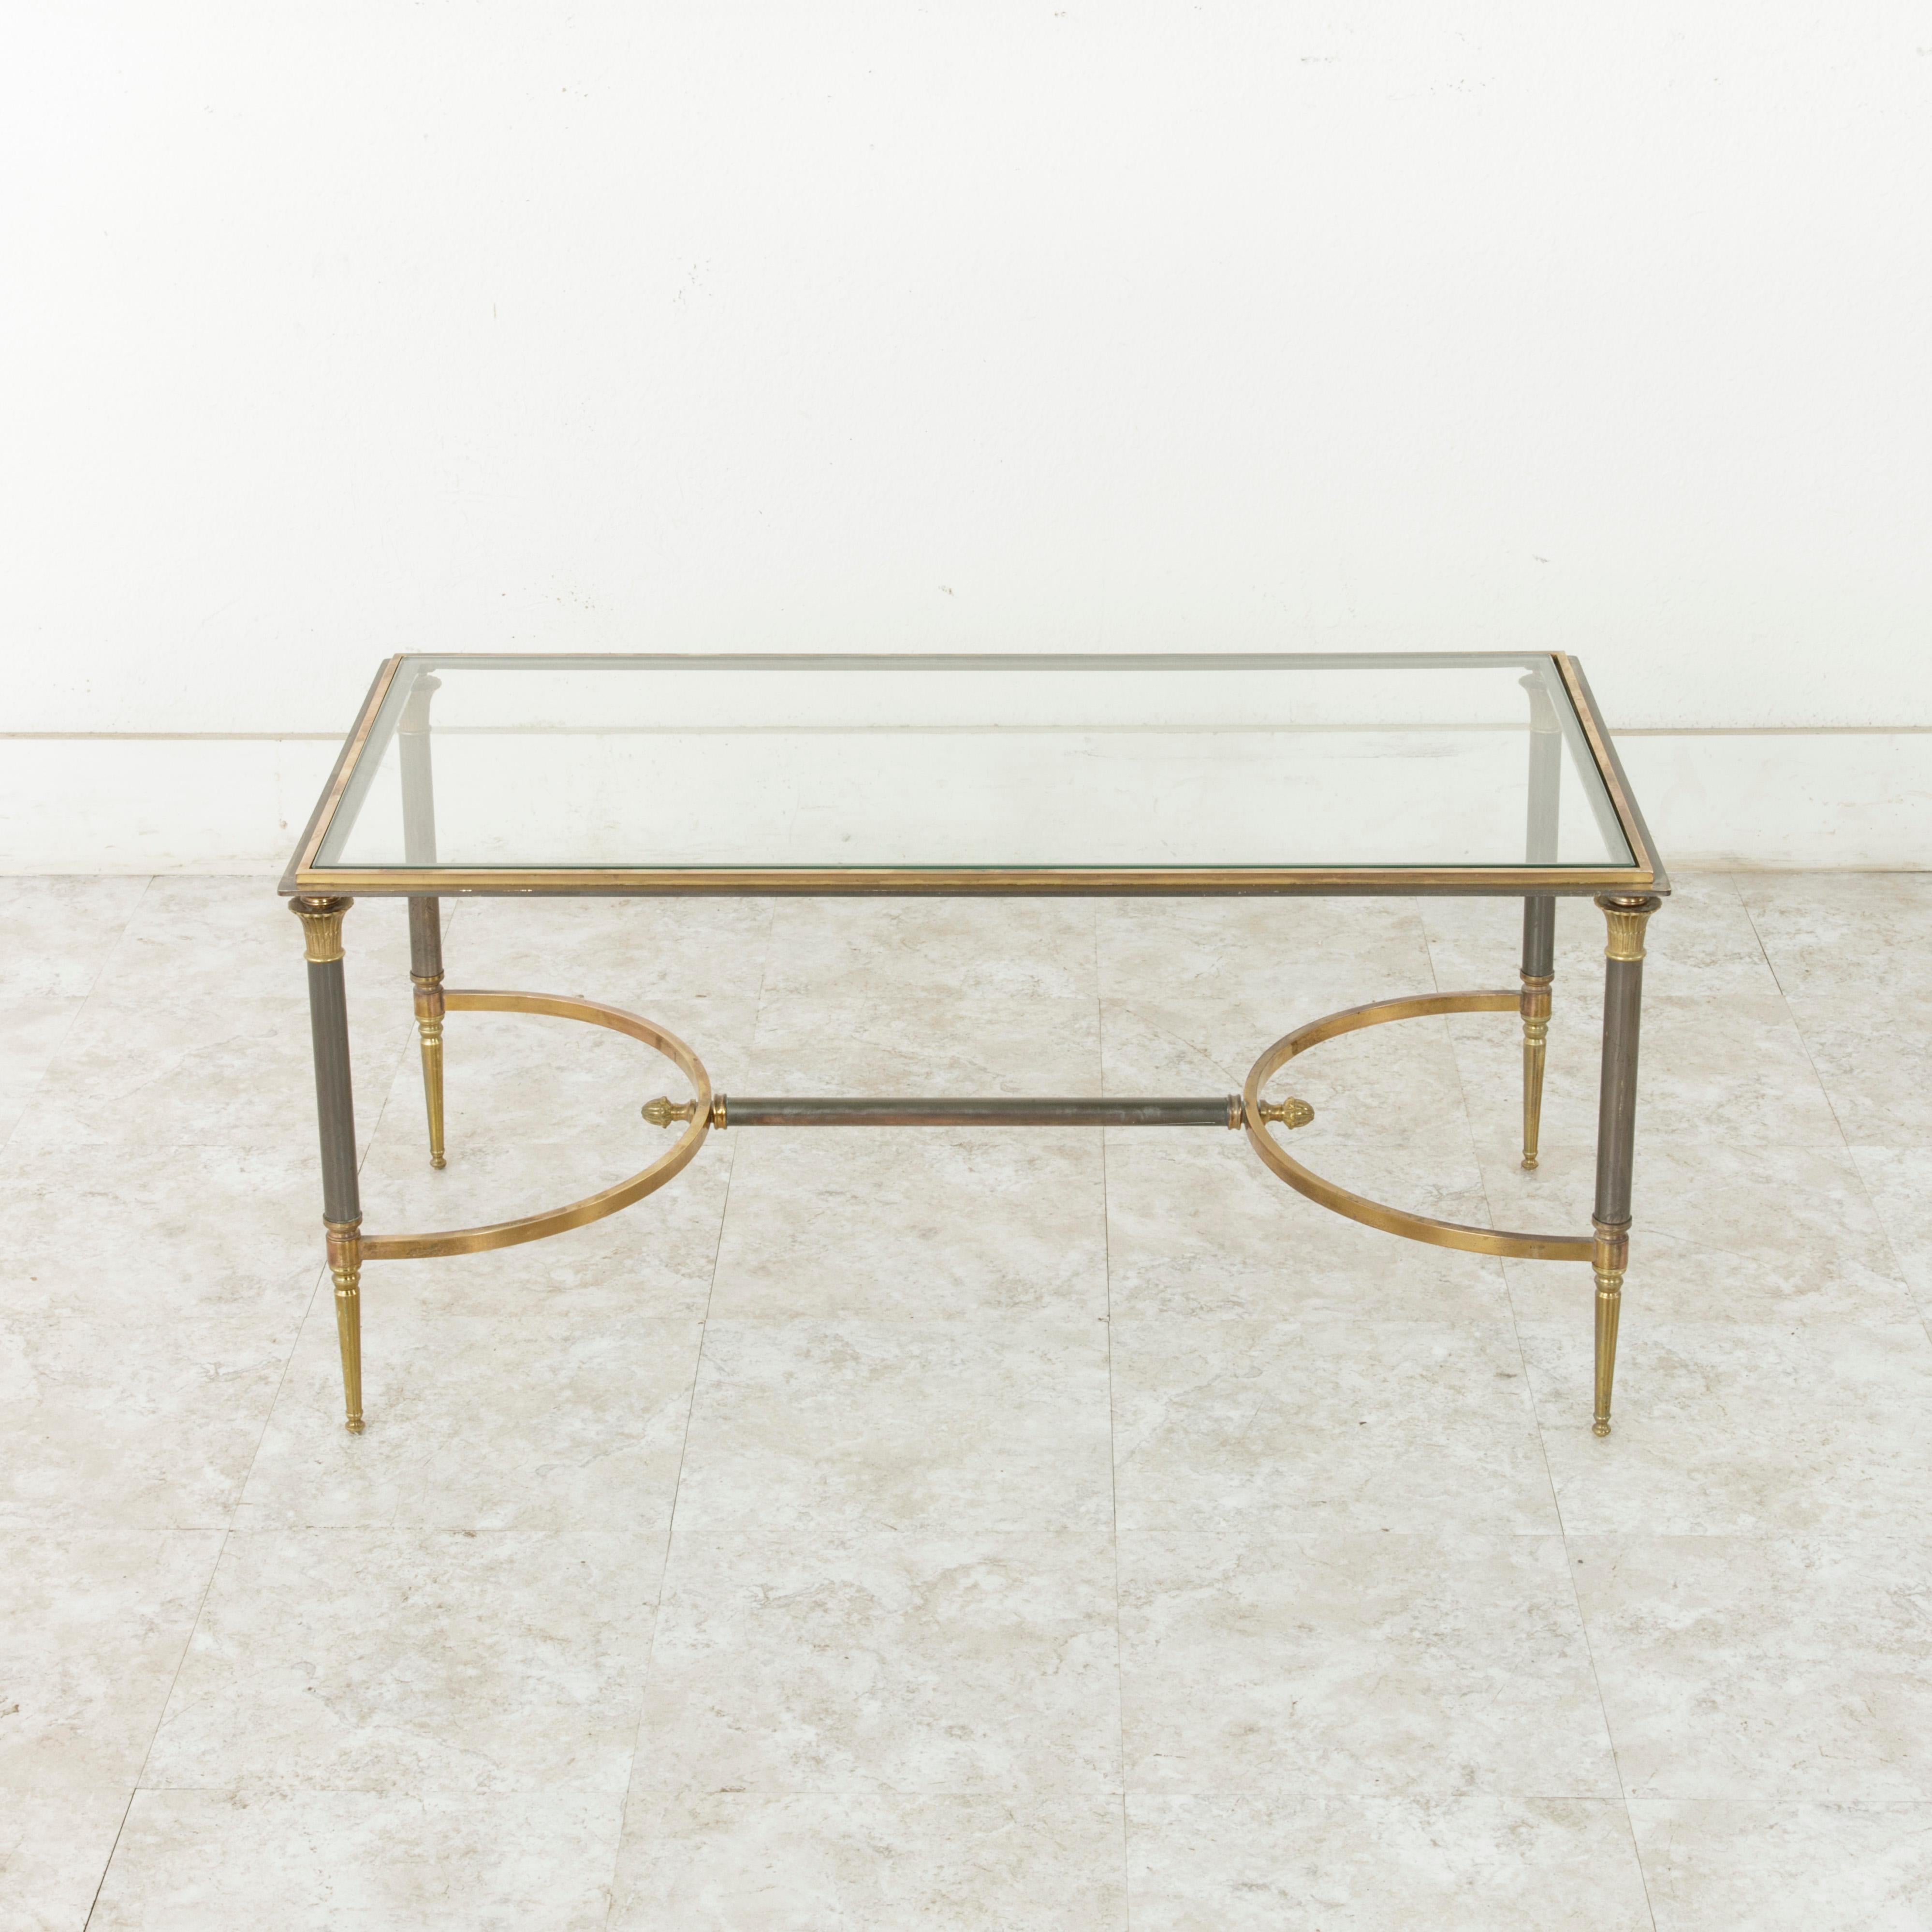 This midcentury French brass and iron coffee table or cocktail table by Maison Jansen is inspired by the Directoire style with its Egyptian style capitals at the top of each leg. The base is joined by an H stretcher with half circles on each side